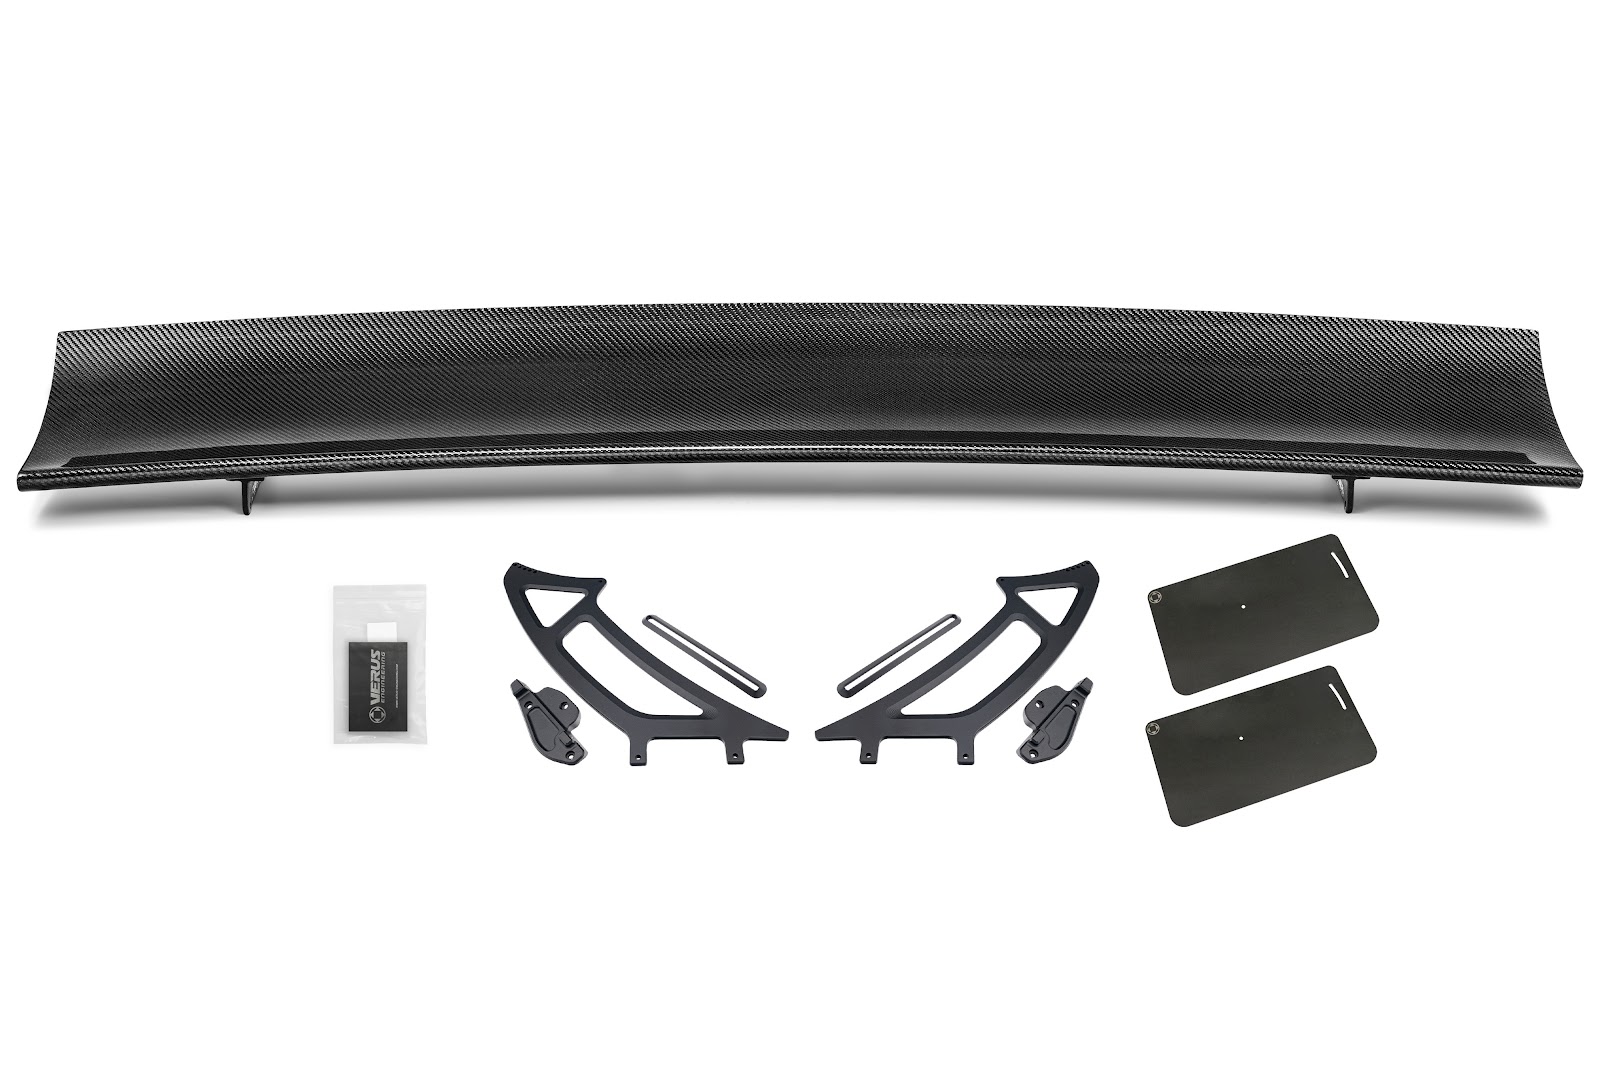 Verus Engineering UCW rear wing kit for a Toyota GR86